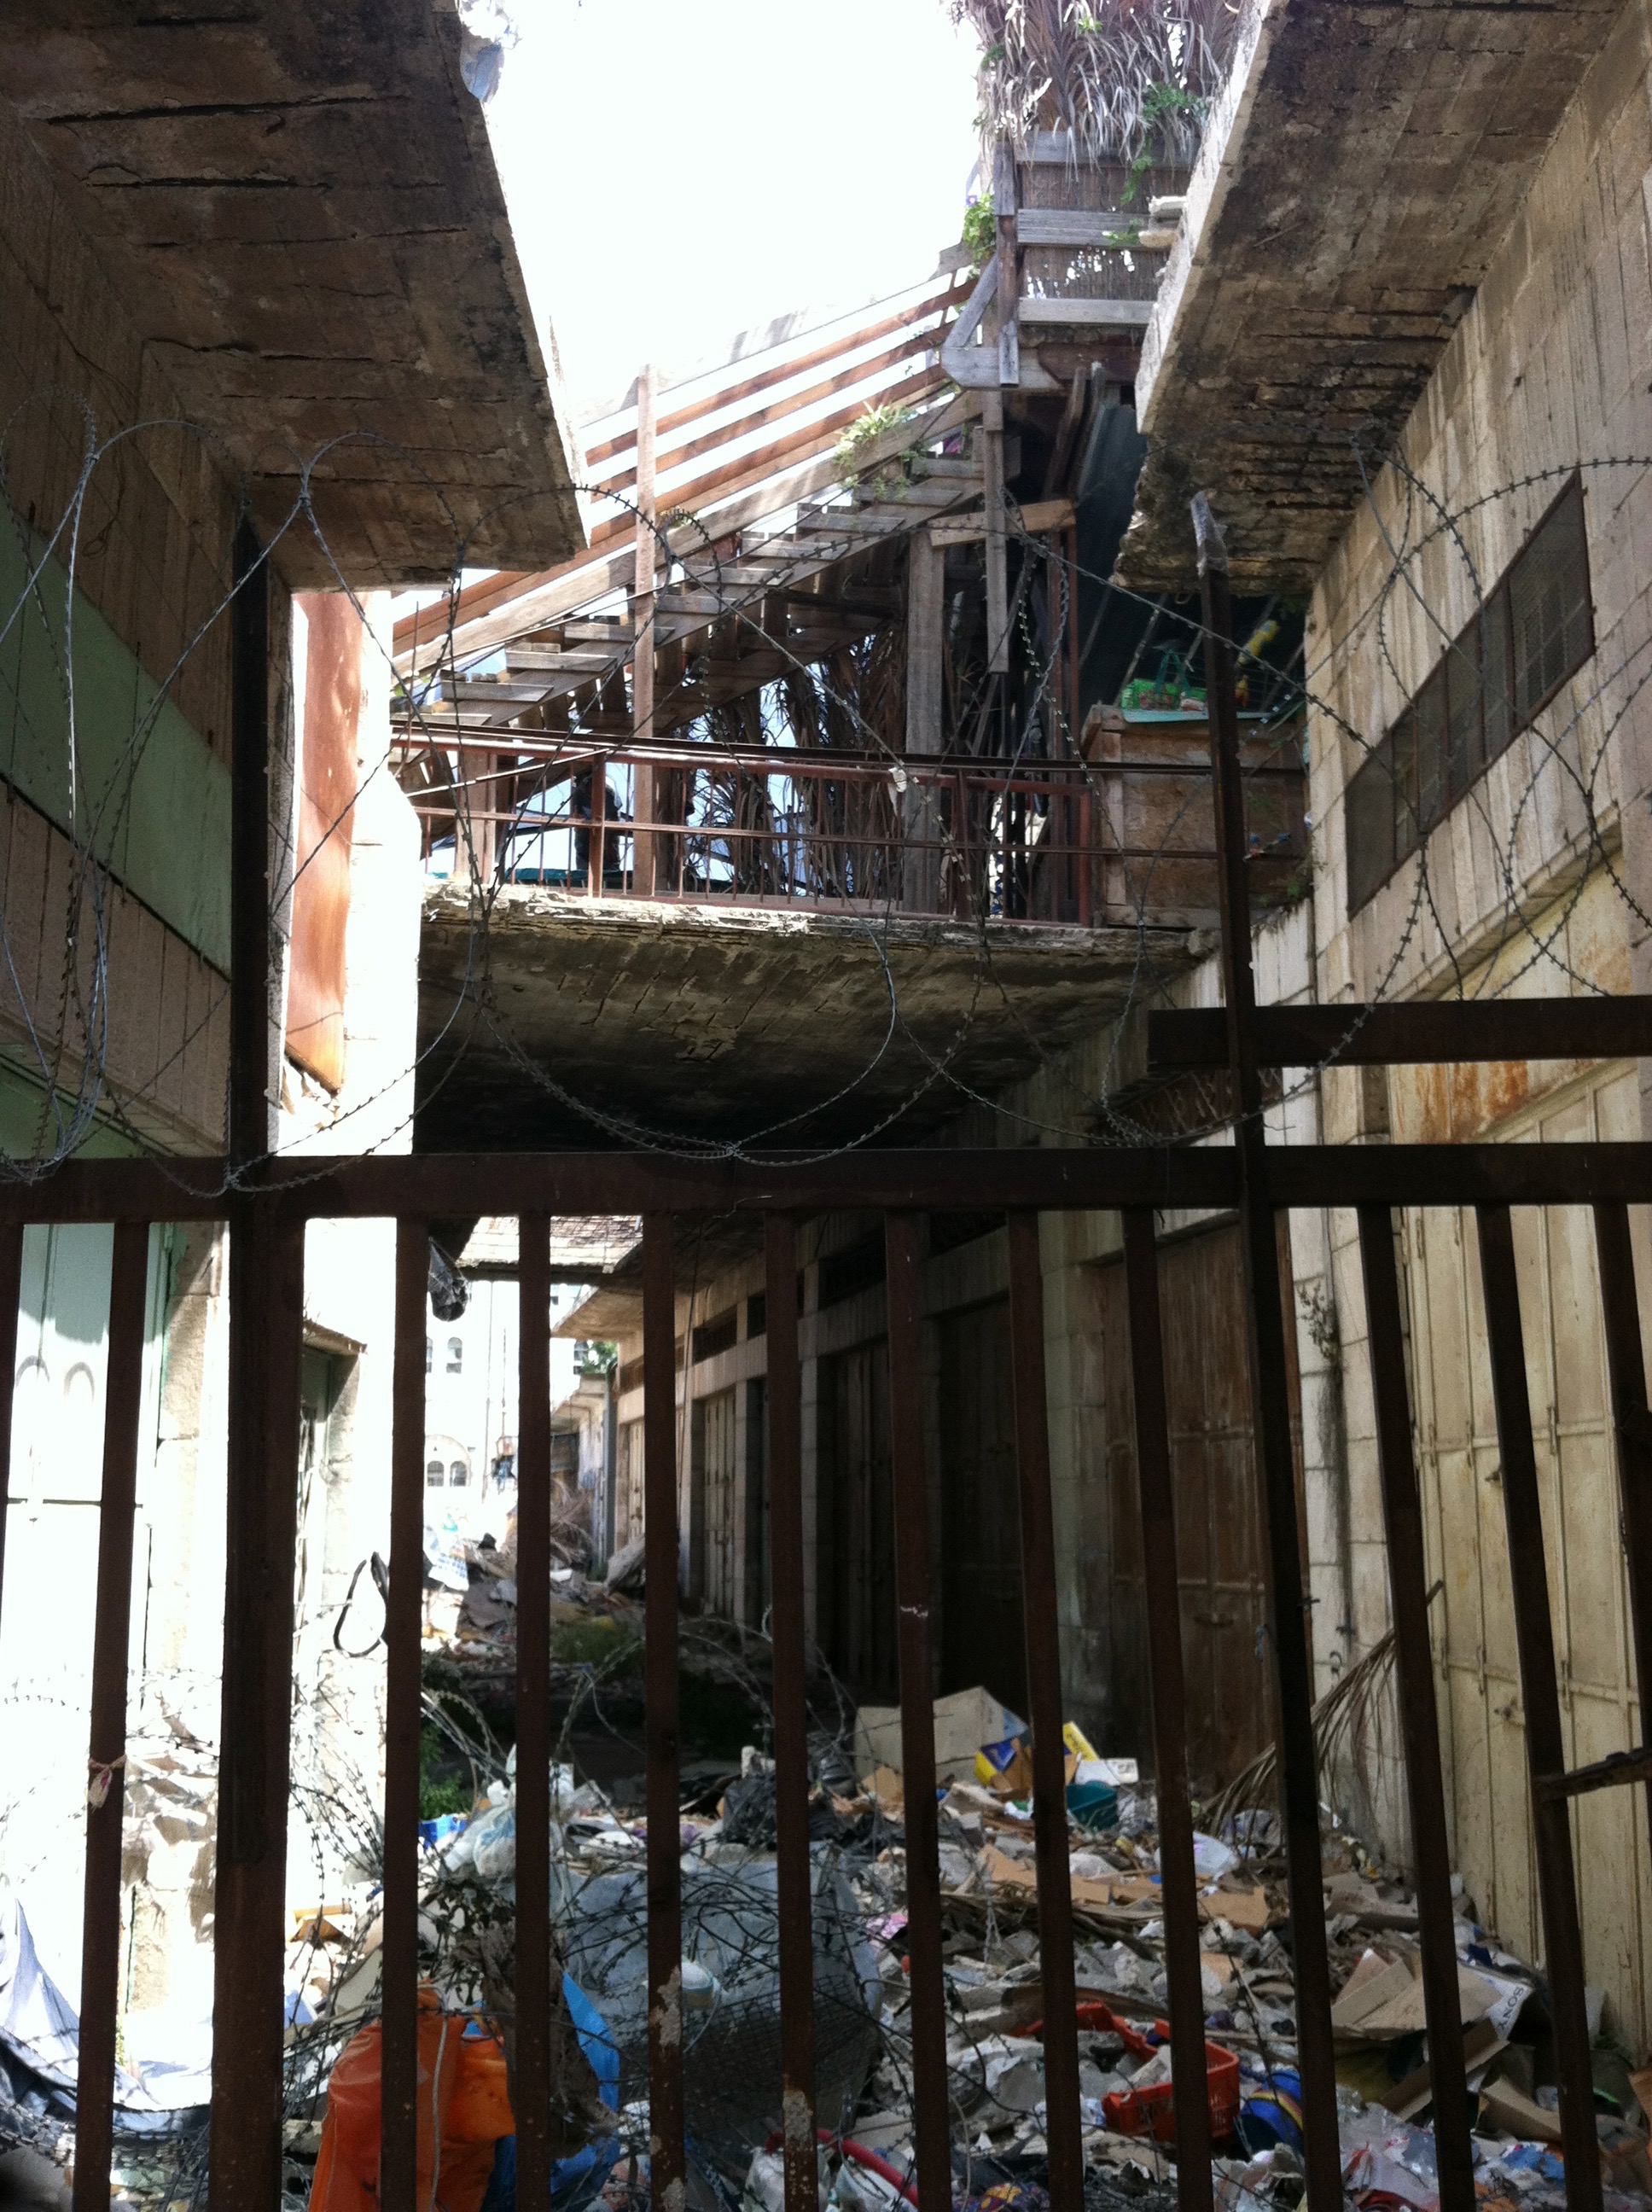 The old market -- Israeli settlers living upstairs made it impossible for life to continue.